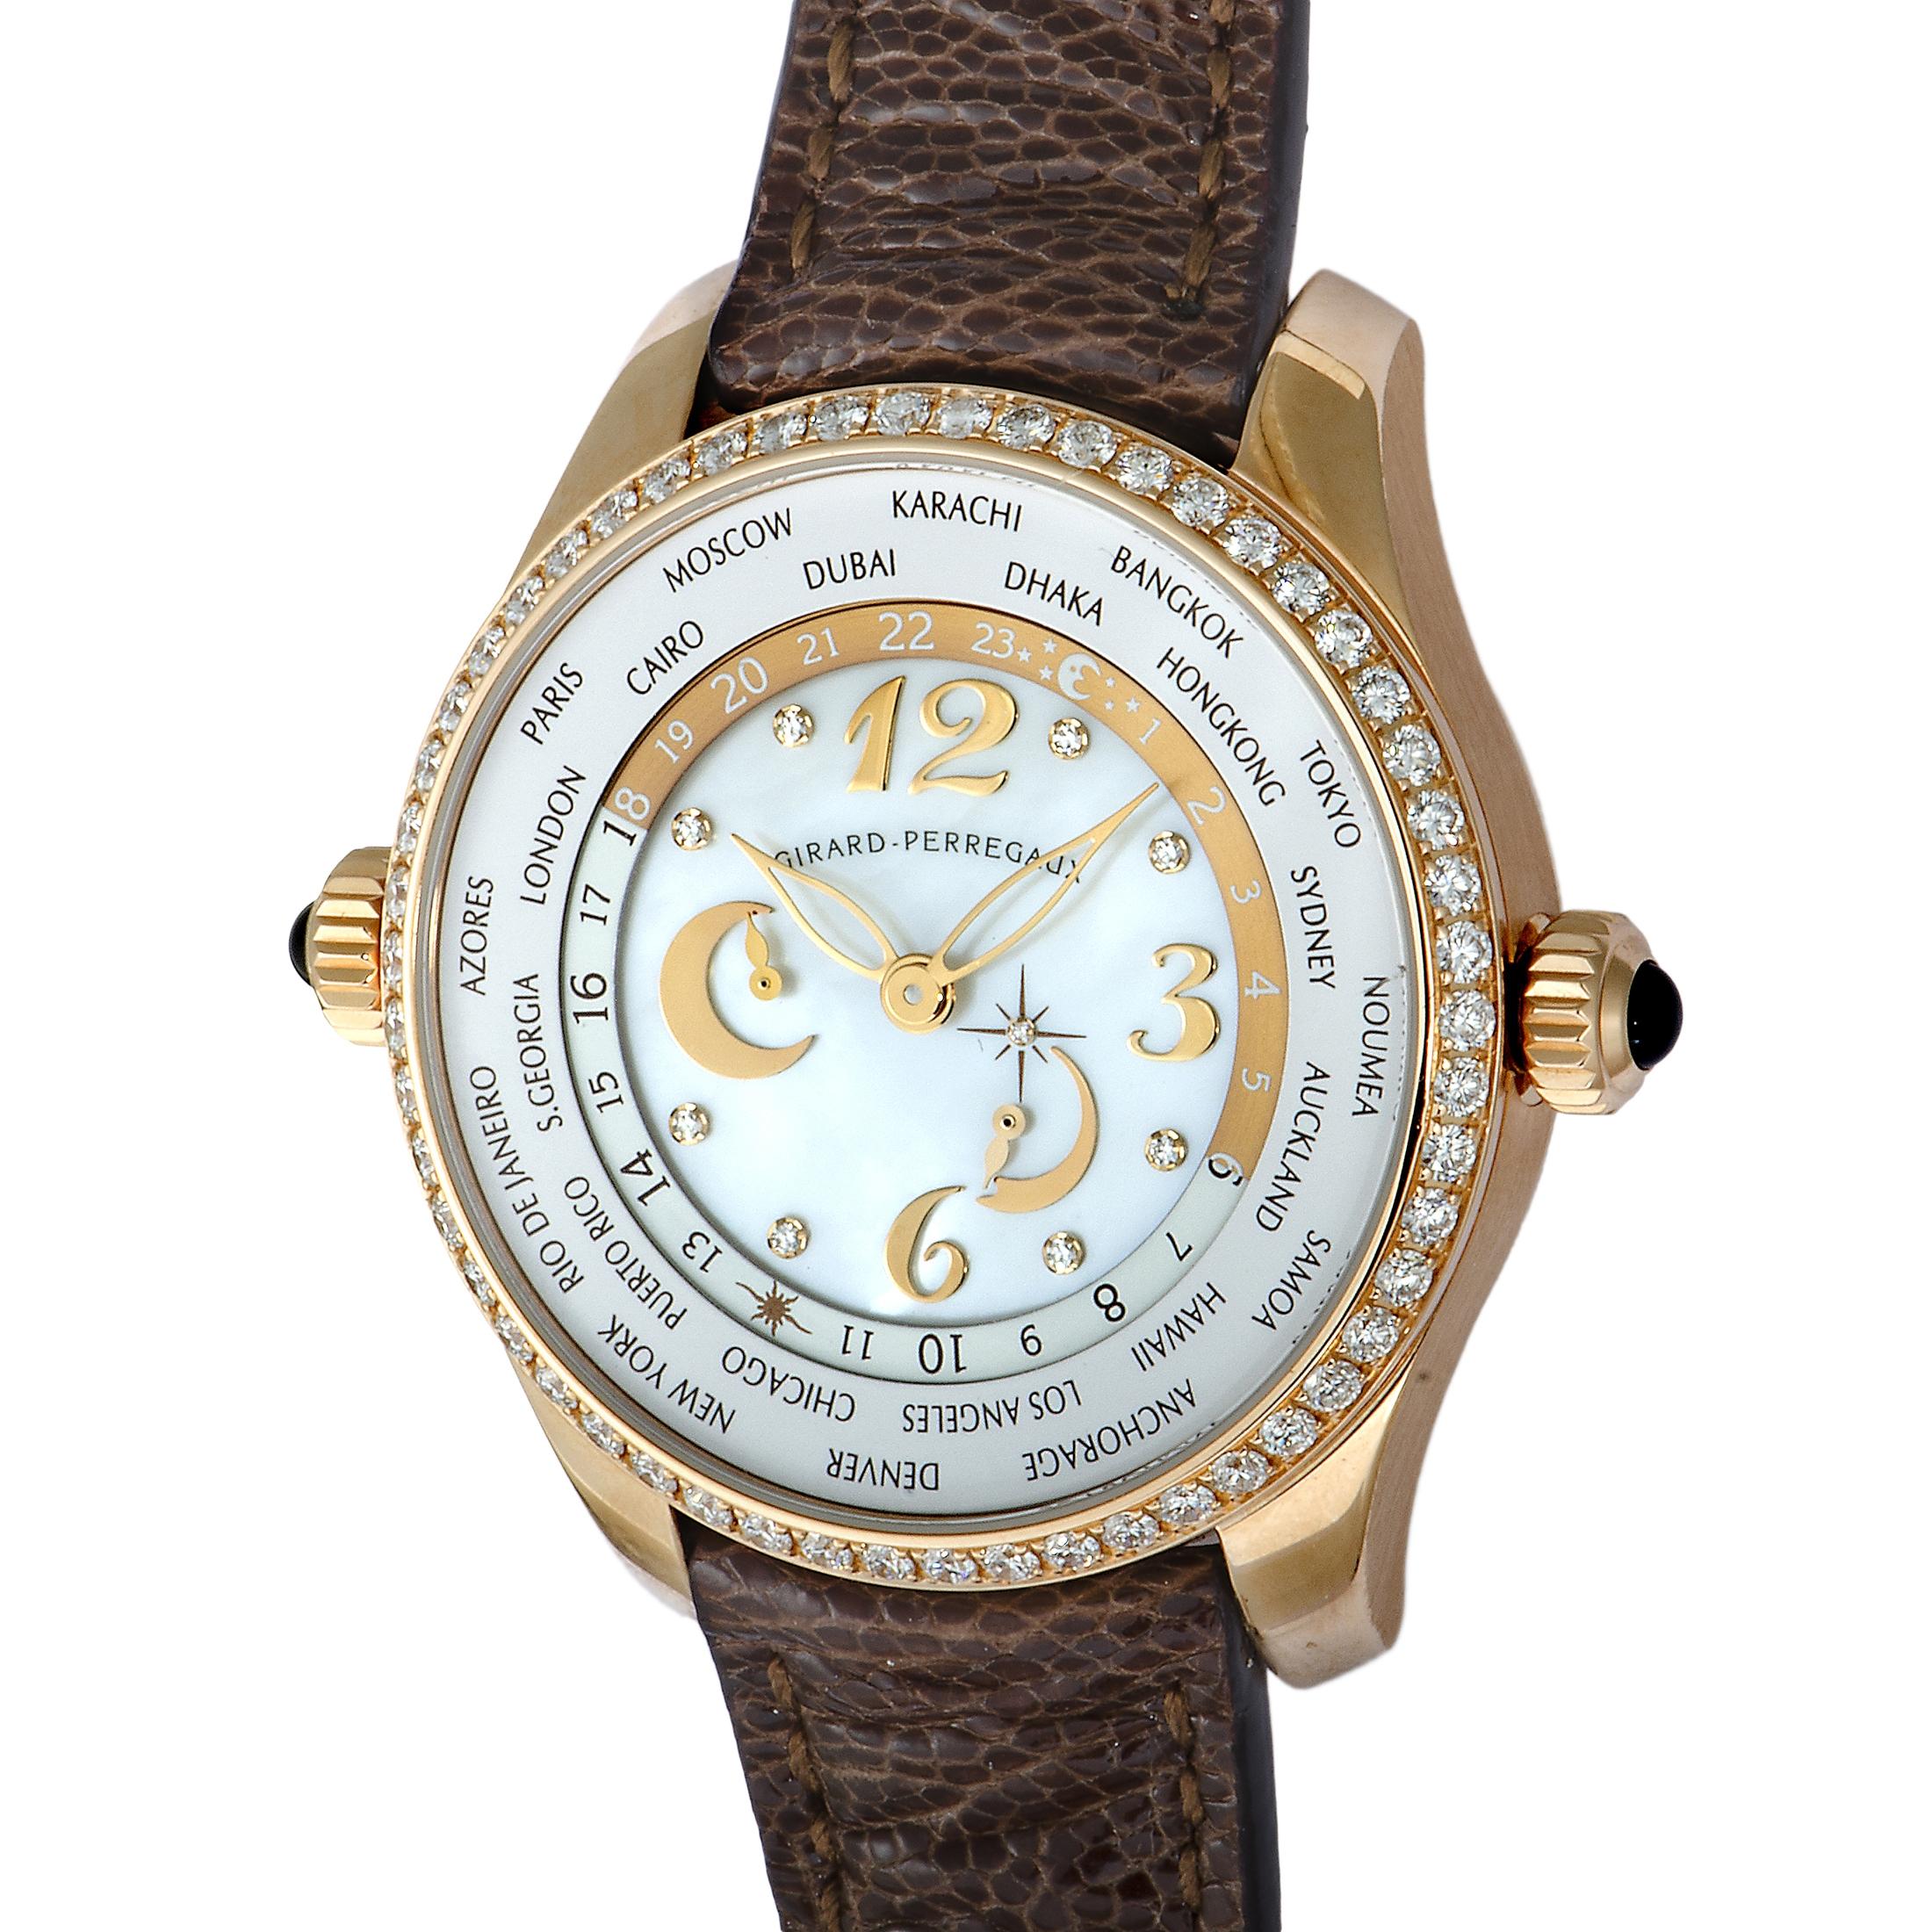 The eternally stylish and luxuriously radiant combination of gold and diamonds is coupled with intriguing décor upon the dial to produce a truly magnificent allure in this gorgeous timepiece from Girard-Perregaux that also offers the ever-useful